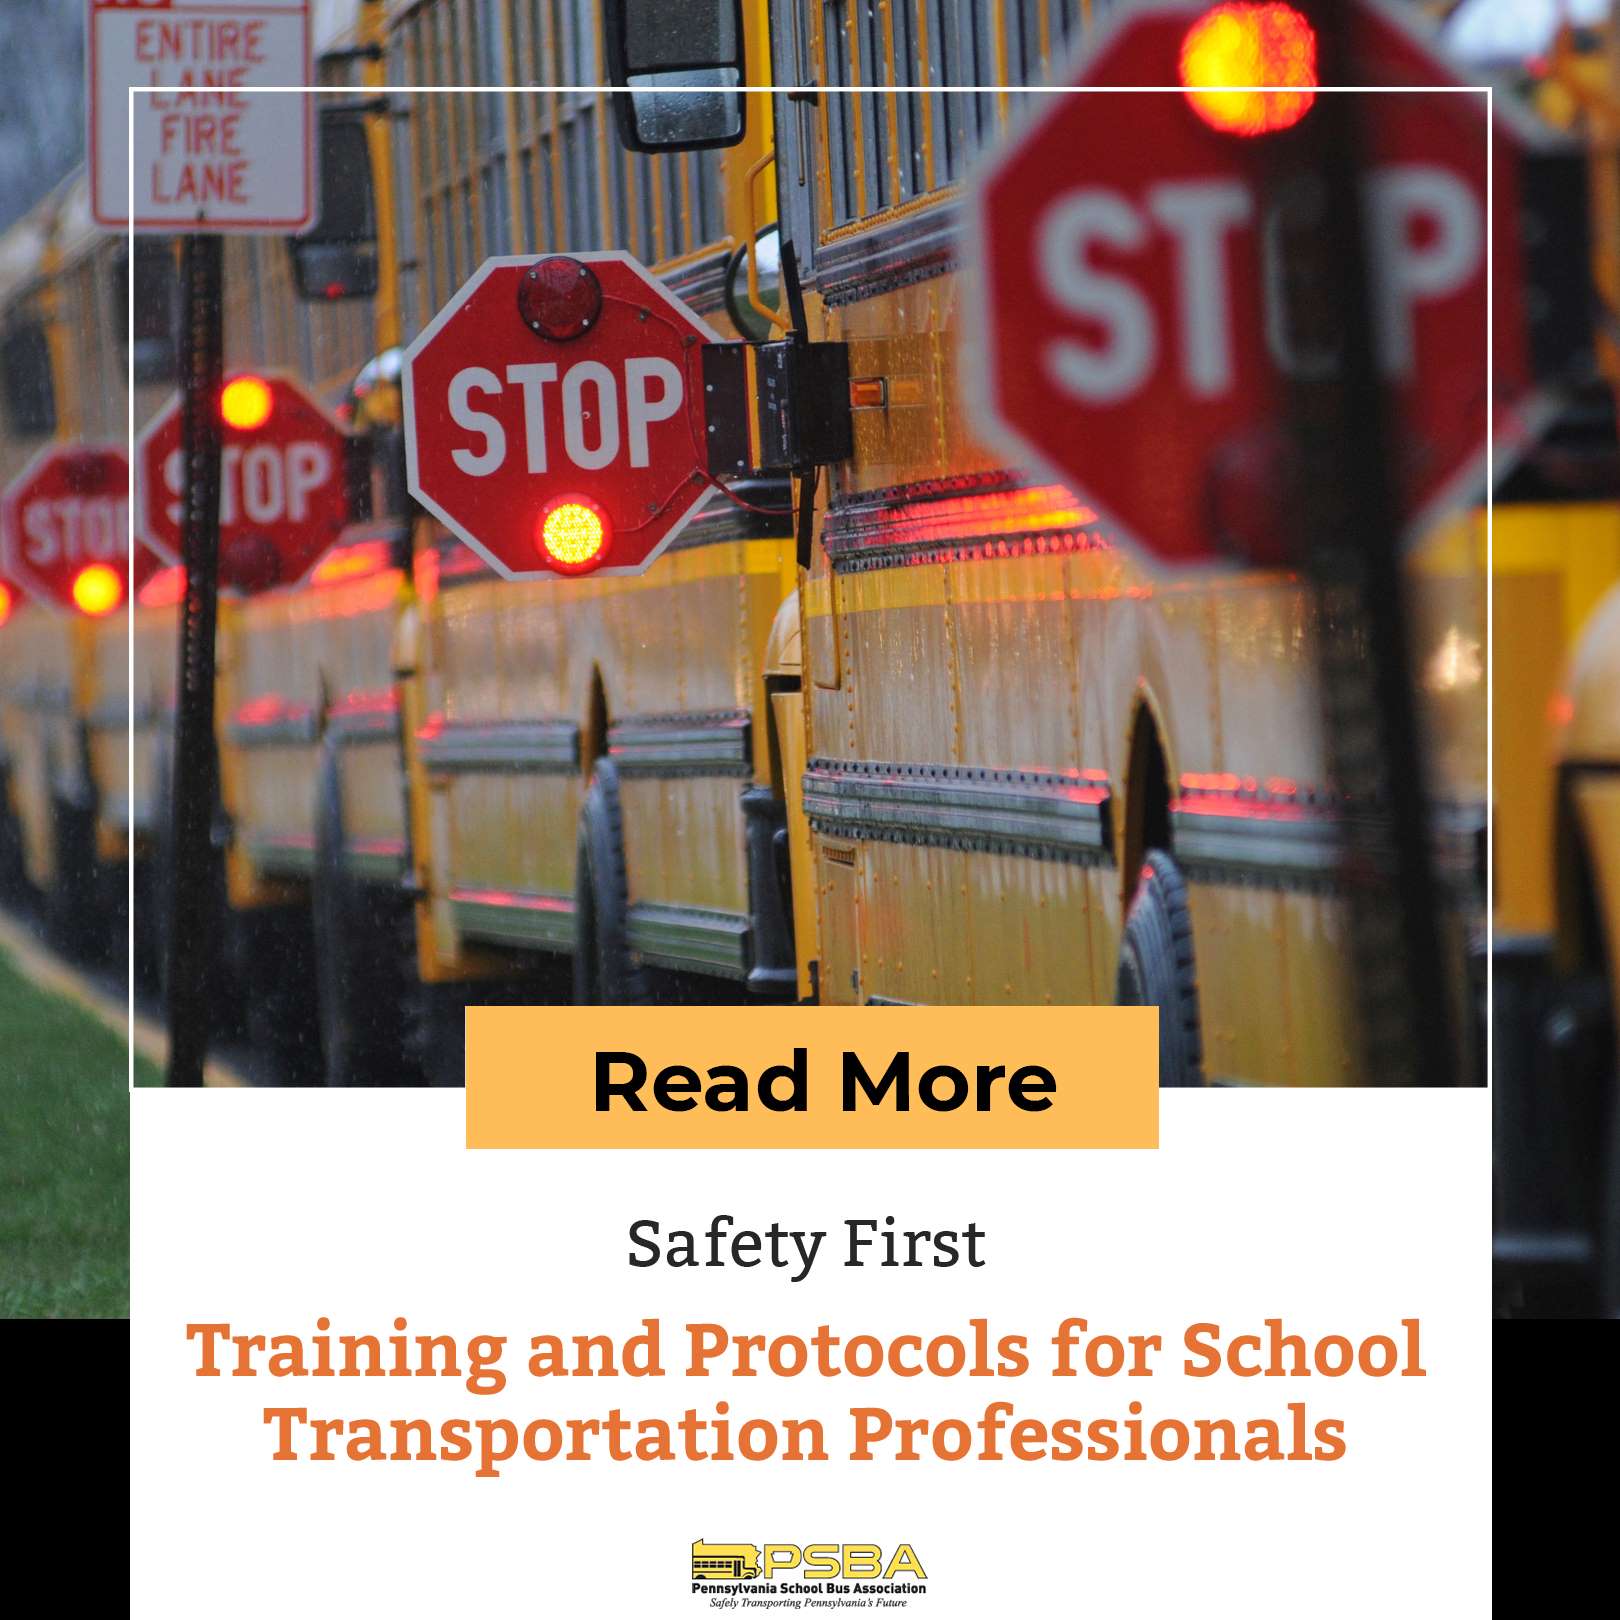 Safety First - Training and Protocols for School Transportation Professionals